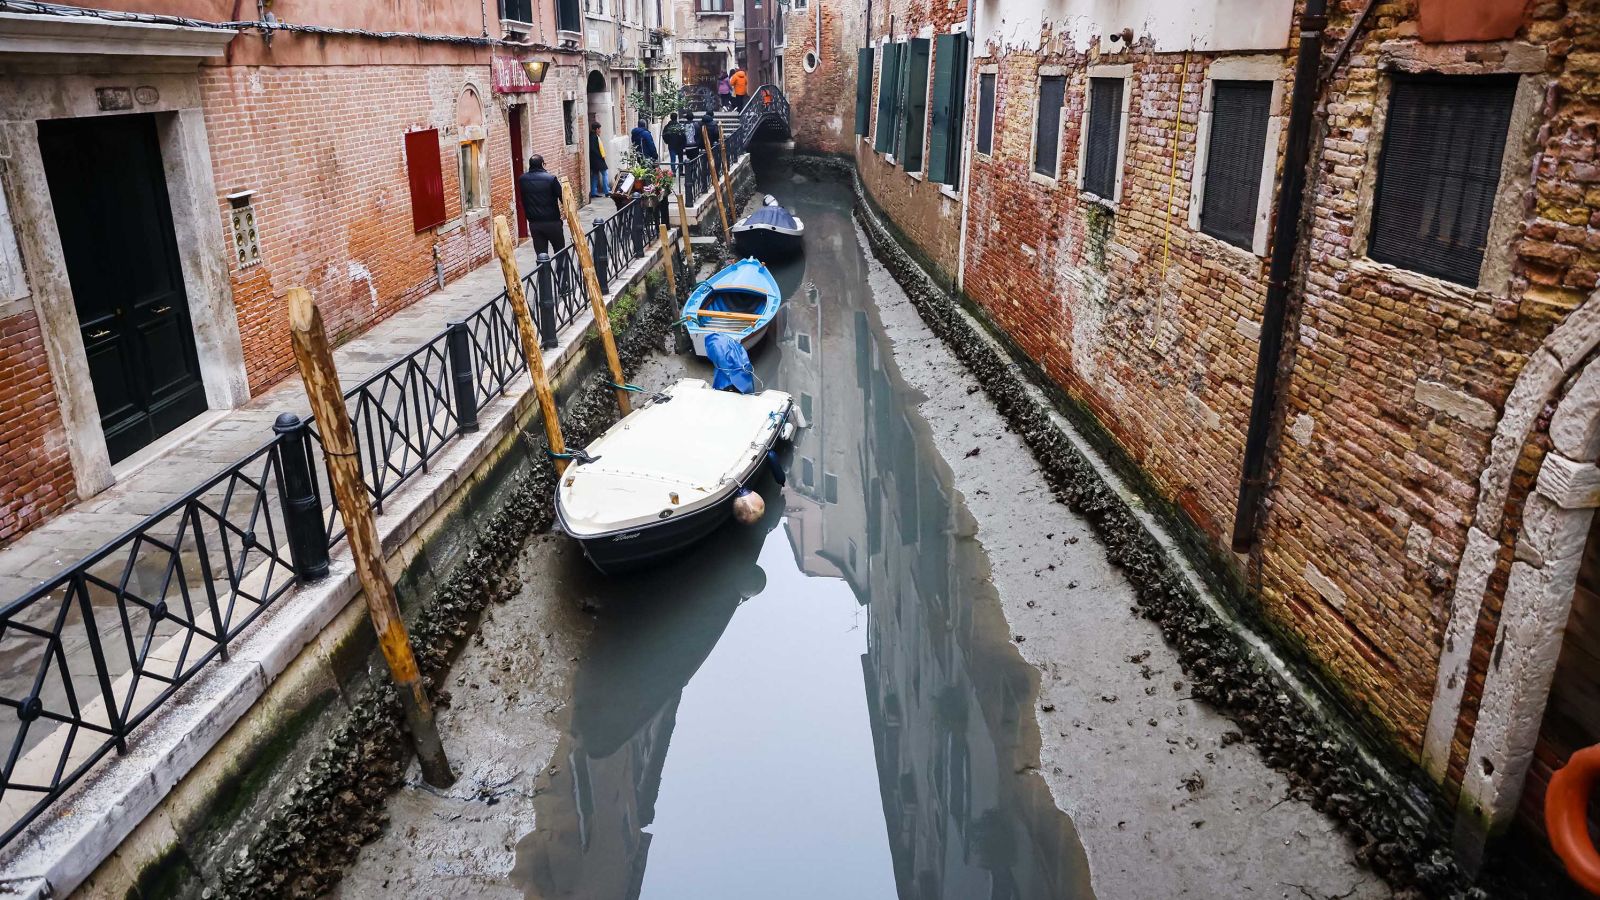 Venice’s canals are drying up amid fears of a new drought in Italy